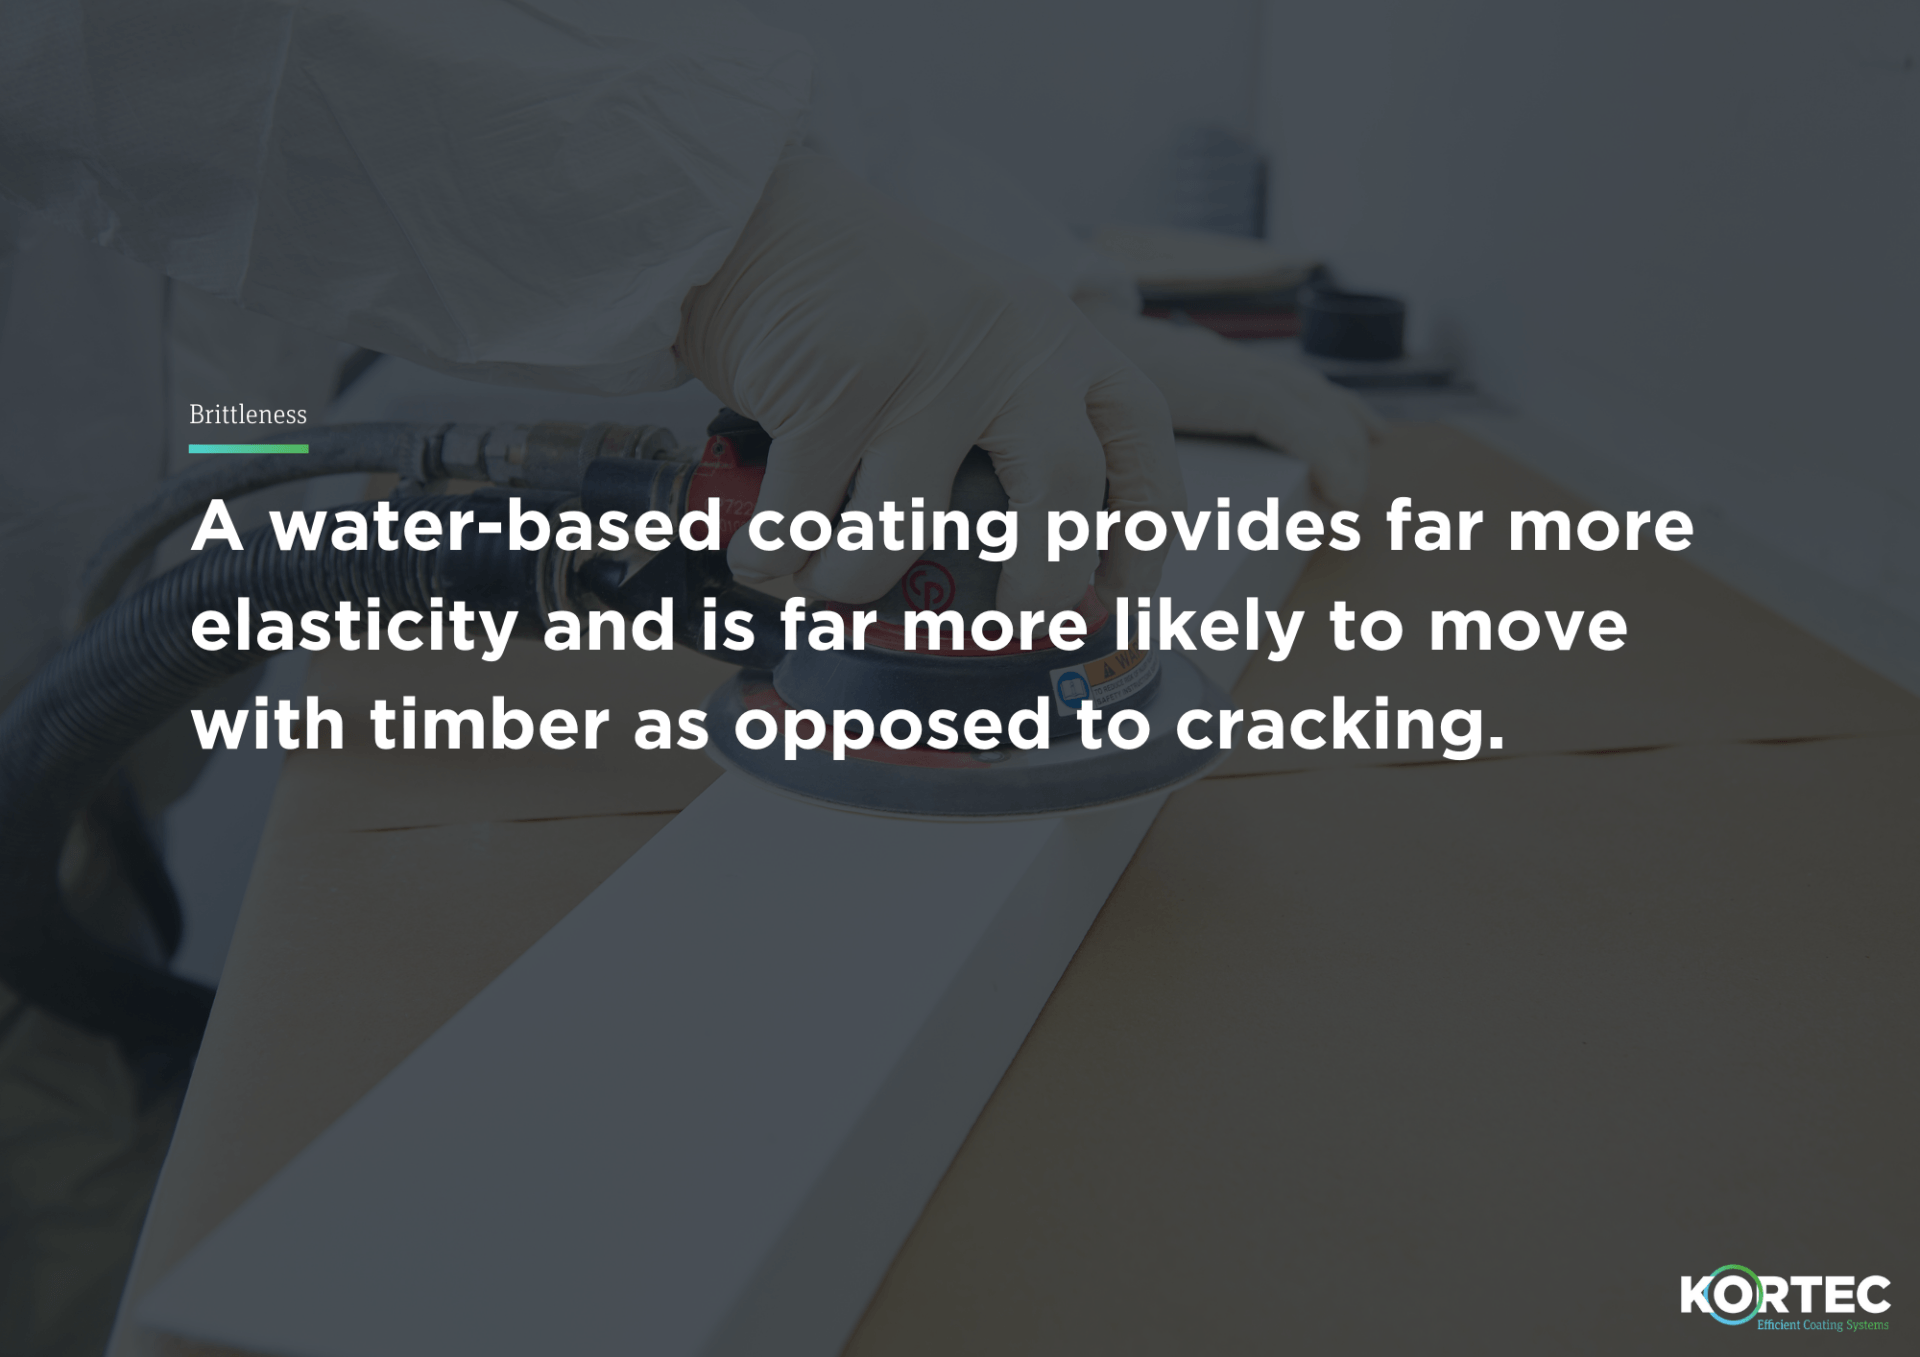 AC Coatings Systems | Kortec Efficient Coating Systems